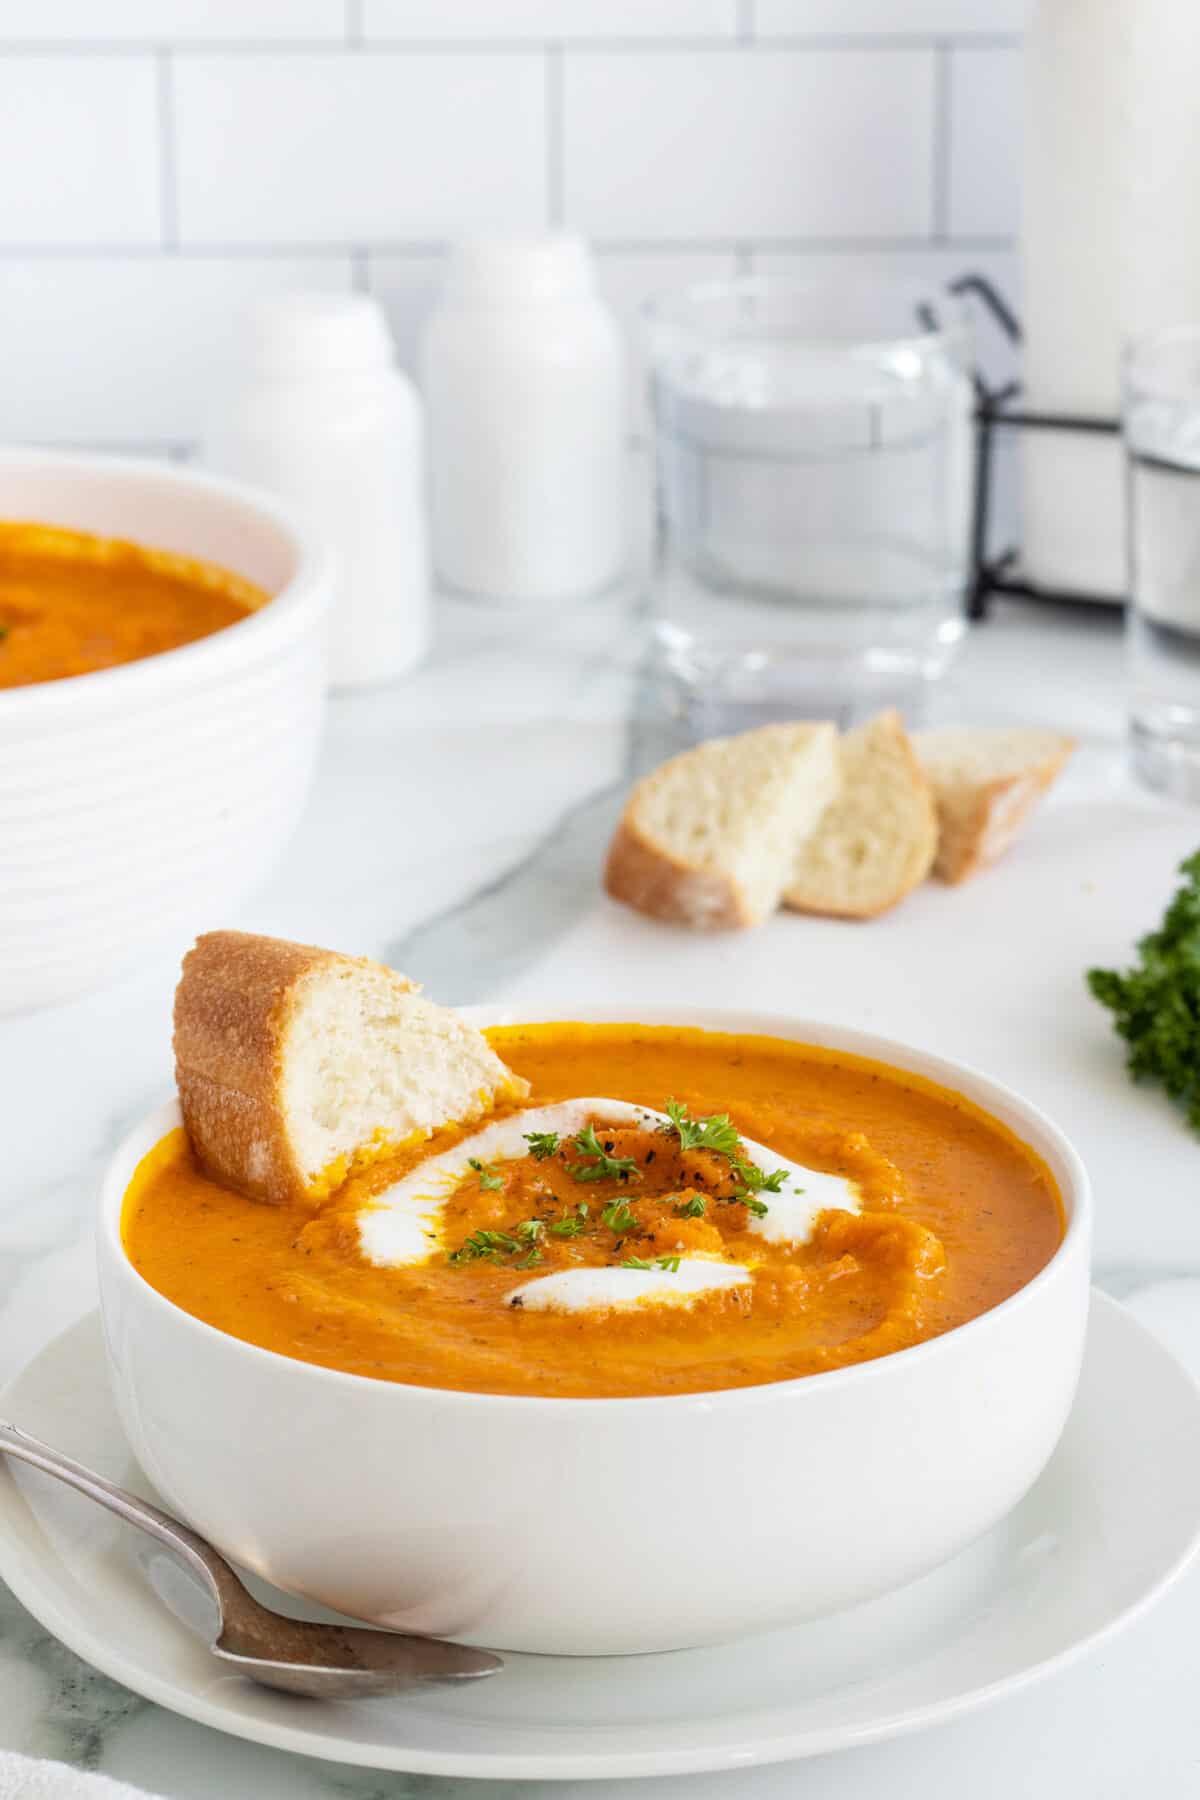 Roasted Carrot Soup with bread in the soup